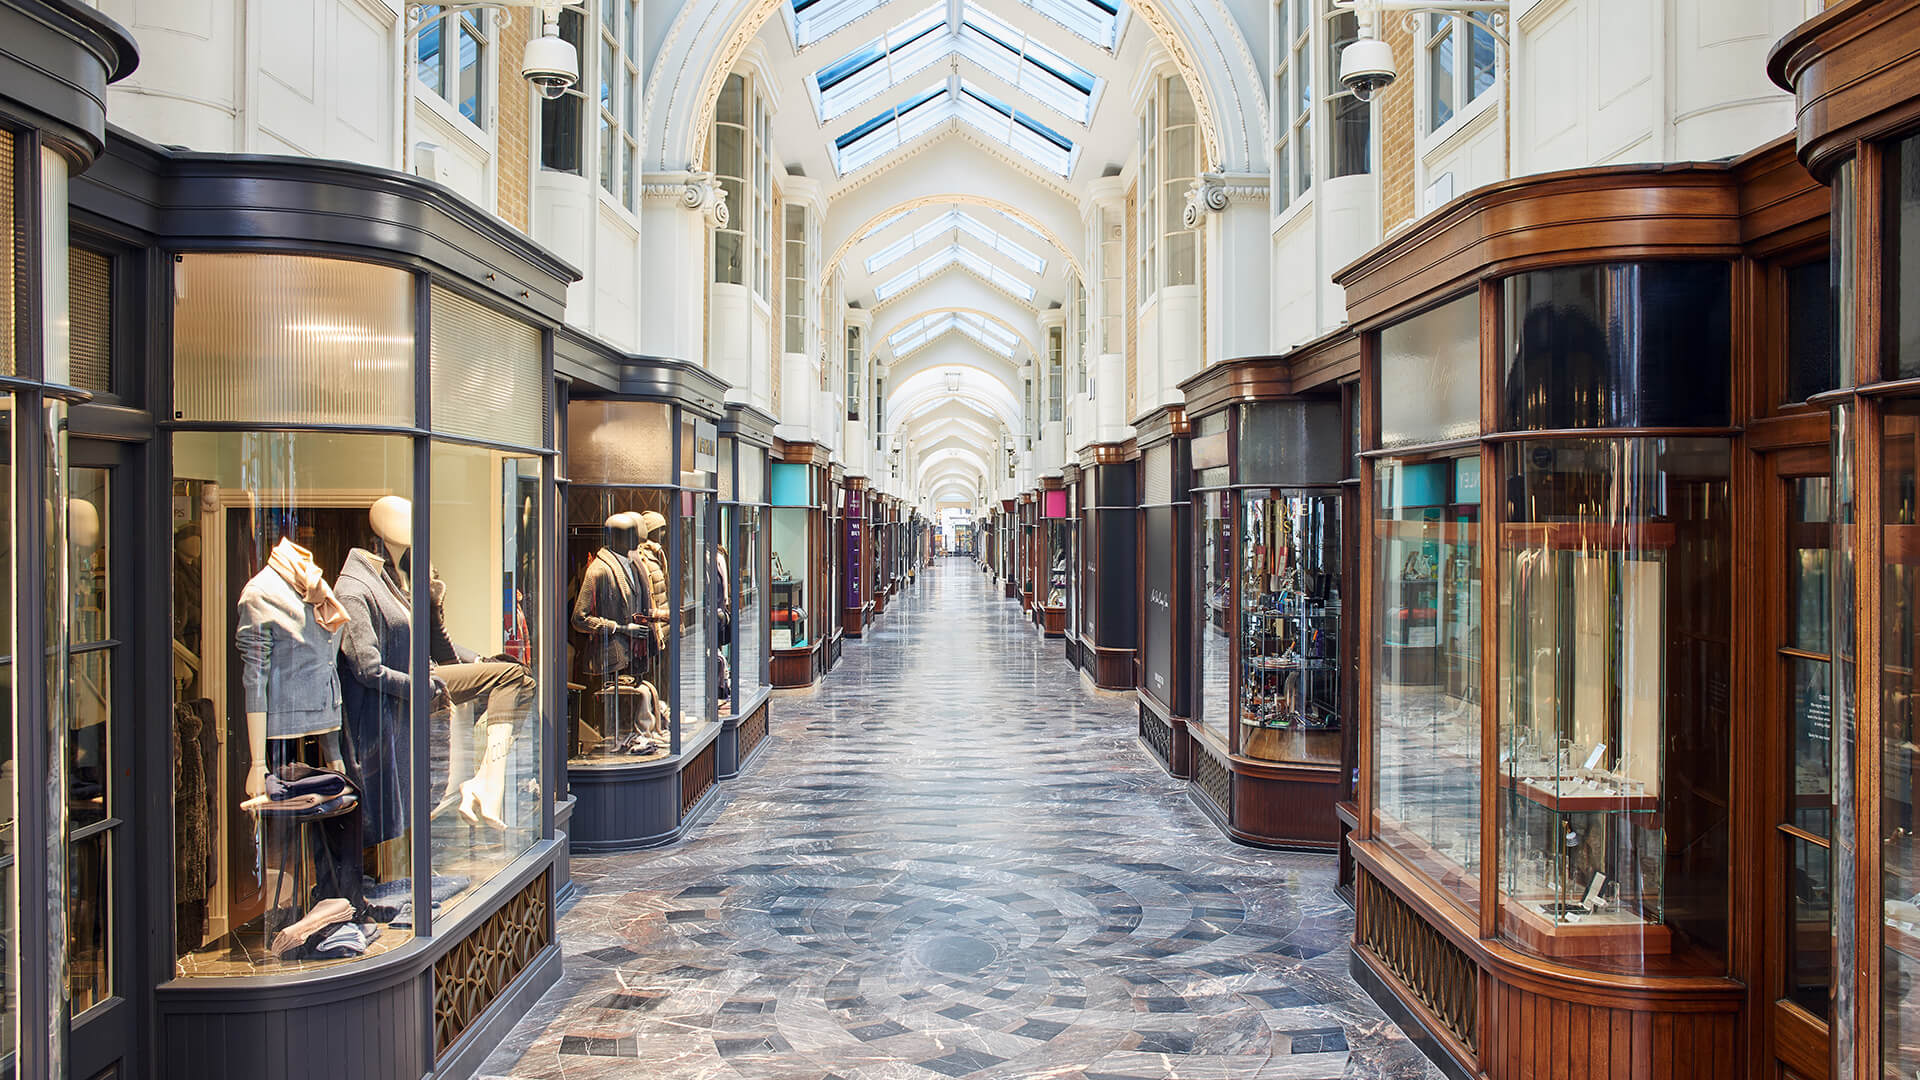 The Burlington Arcade is a place where people with stories do business. - Lux Magazine